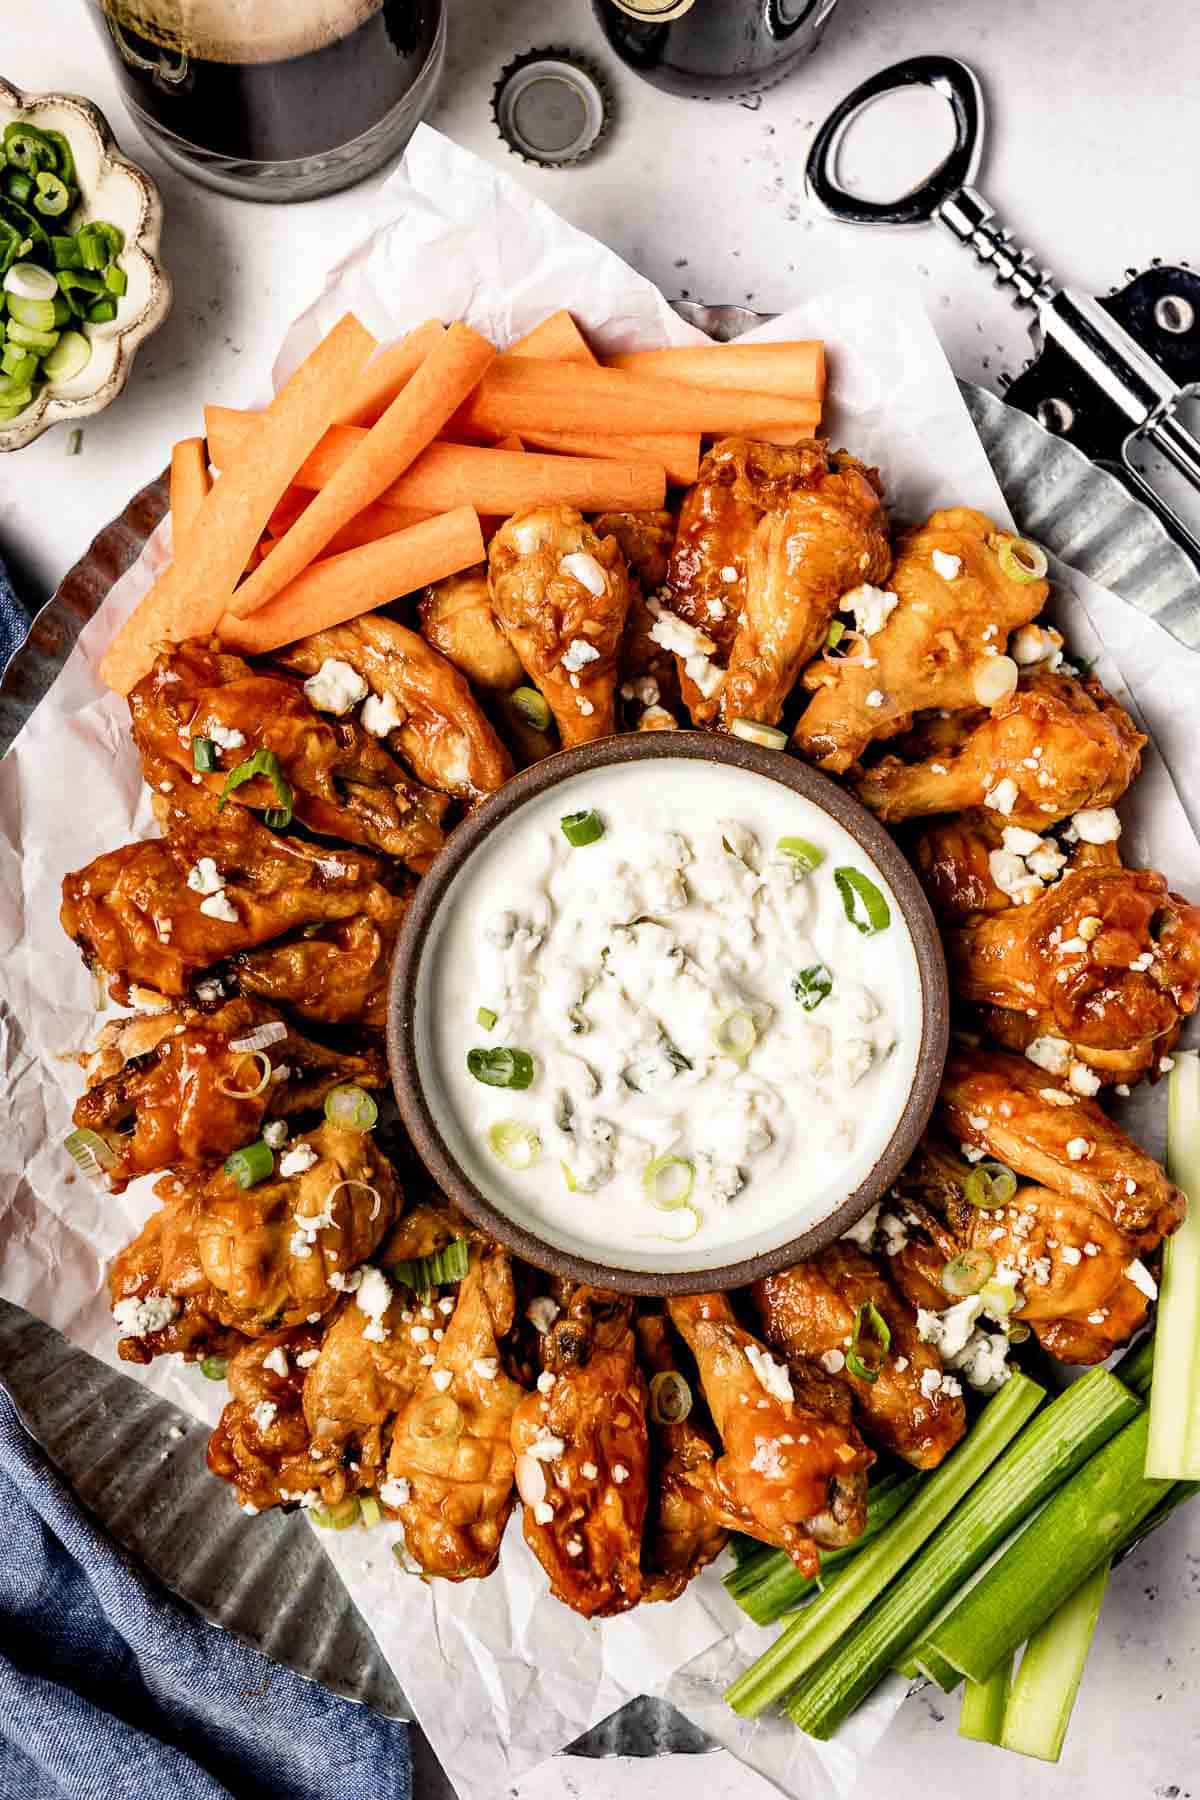 One of the most popular game day recipes, chicken wings served with ranch dressing.